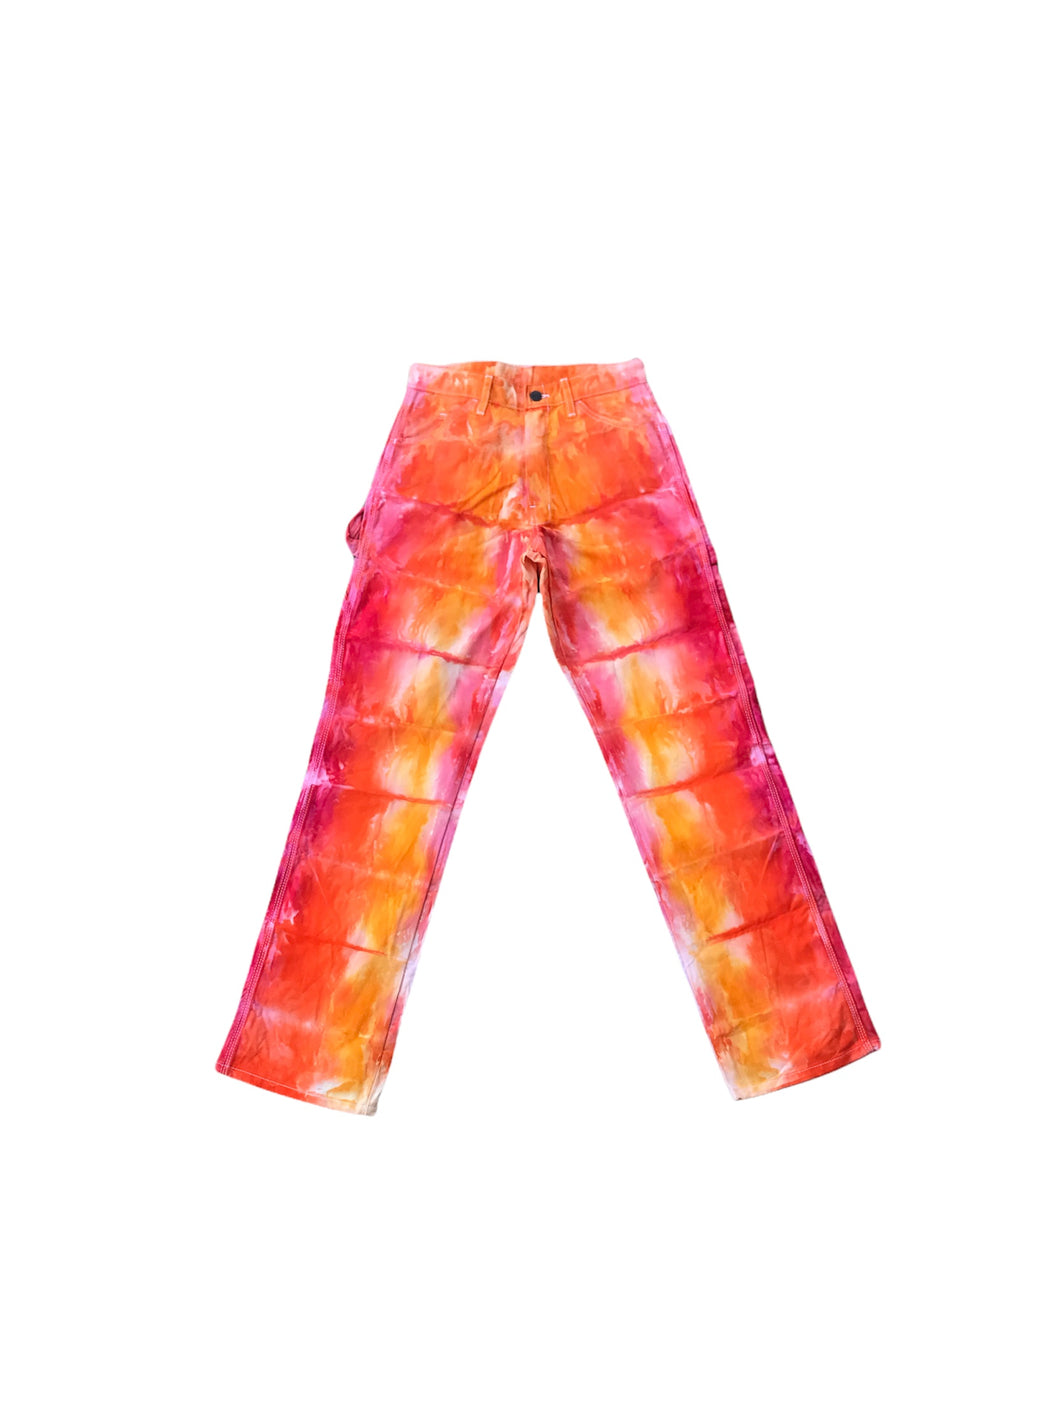 Hand-Dyed Psychedelic Pant (Pink/Orange/Red)